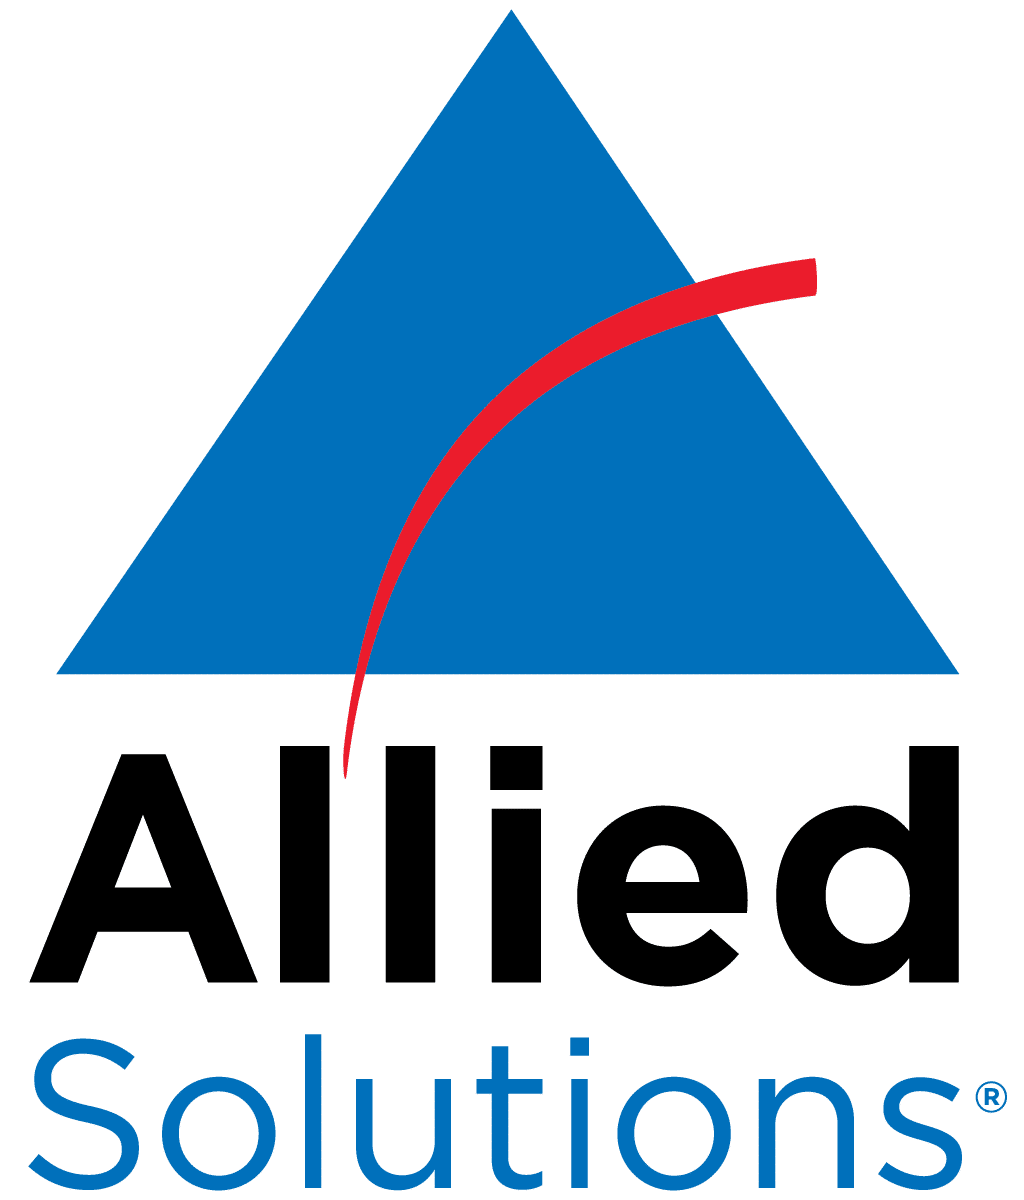 allied--logo_-stacked_-r-g-b-6595bacb32fd8.png